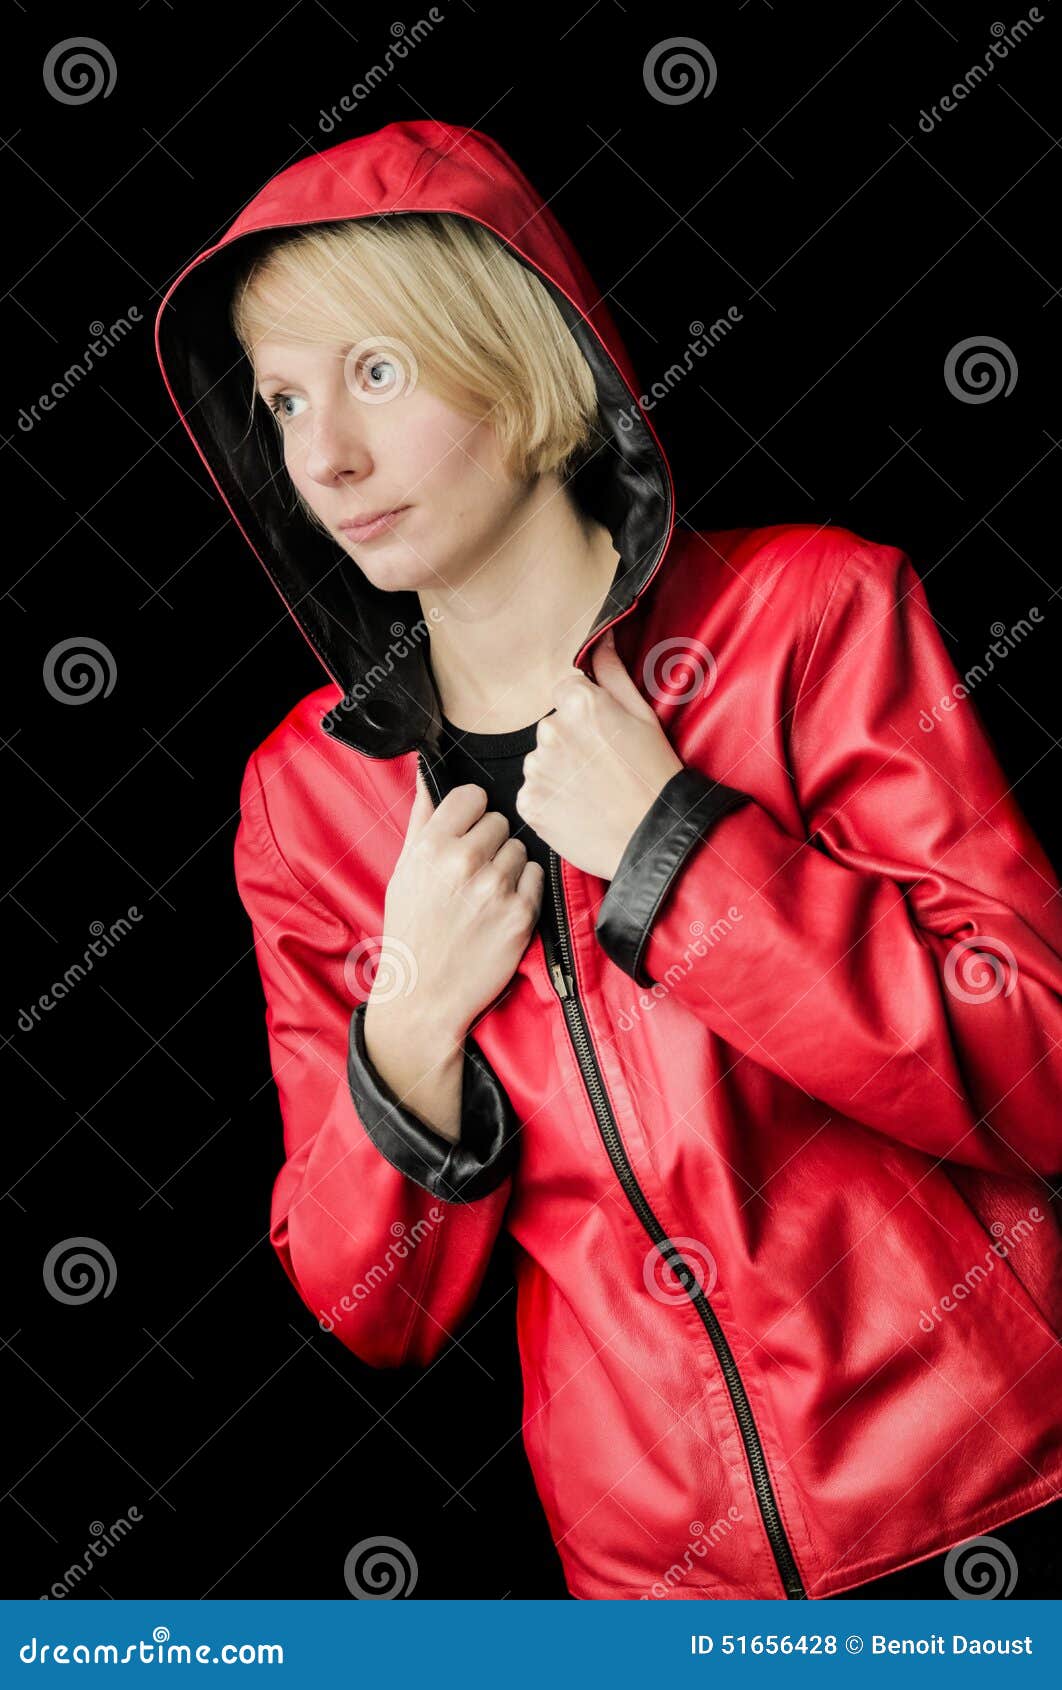 woman posing with a reversible leather jacket